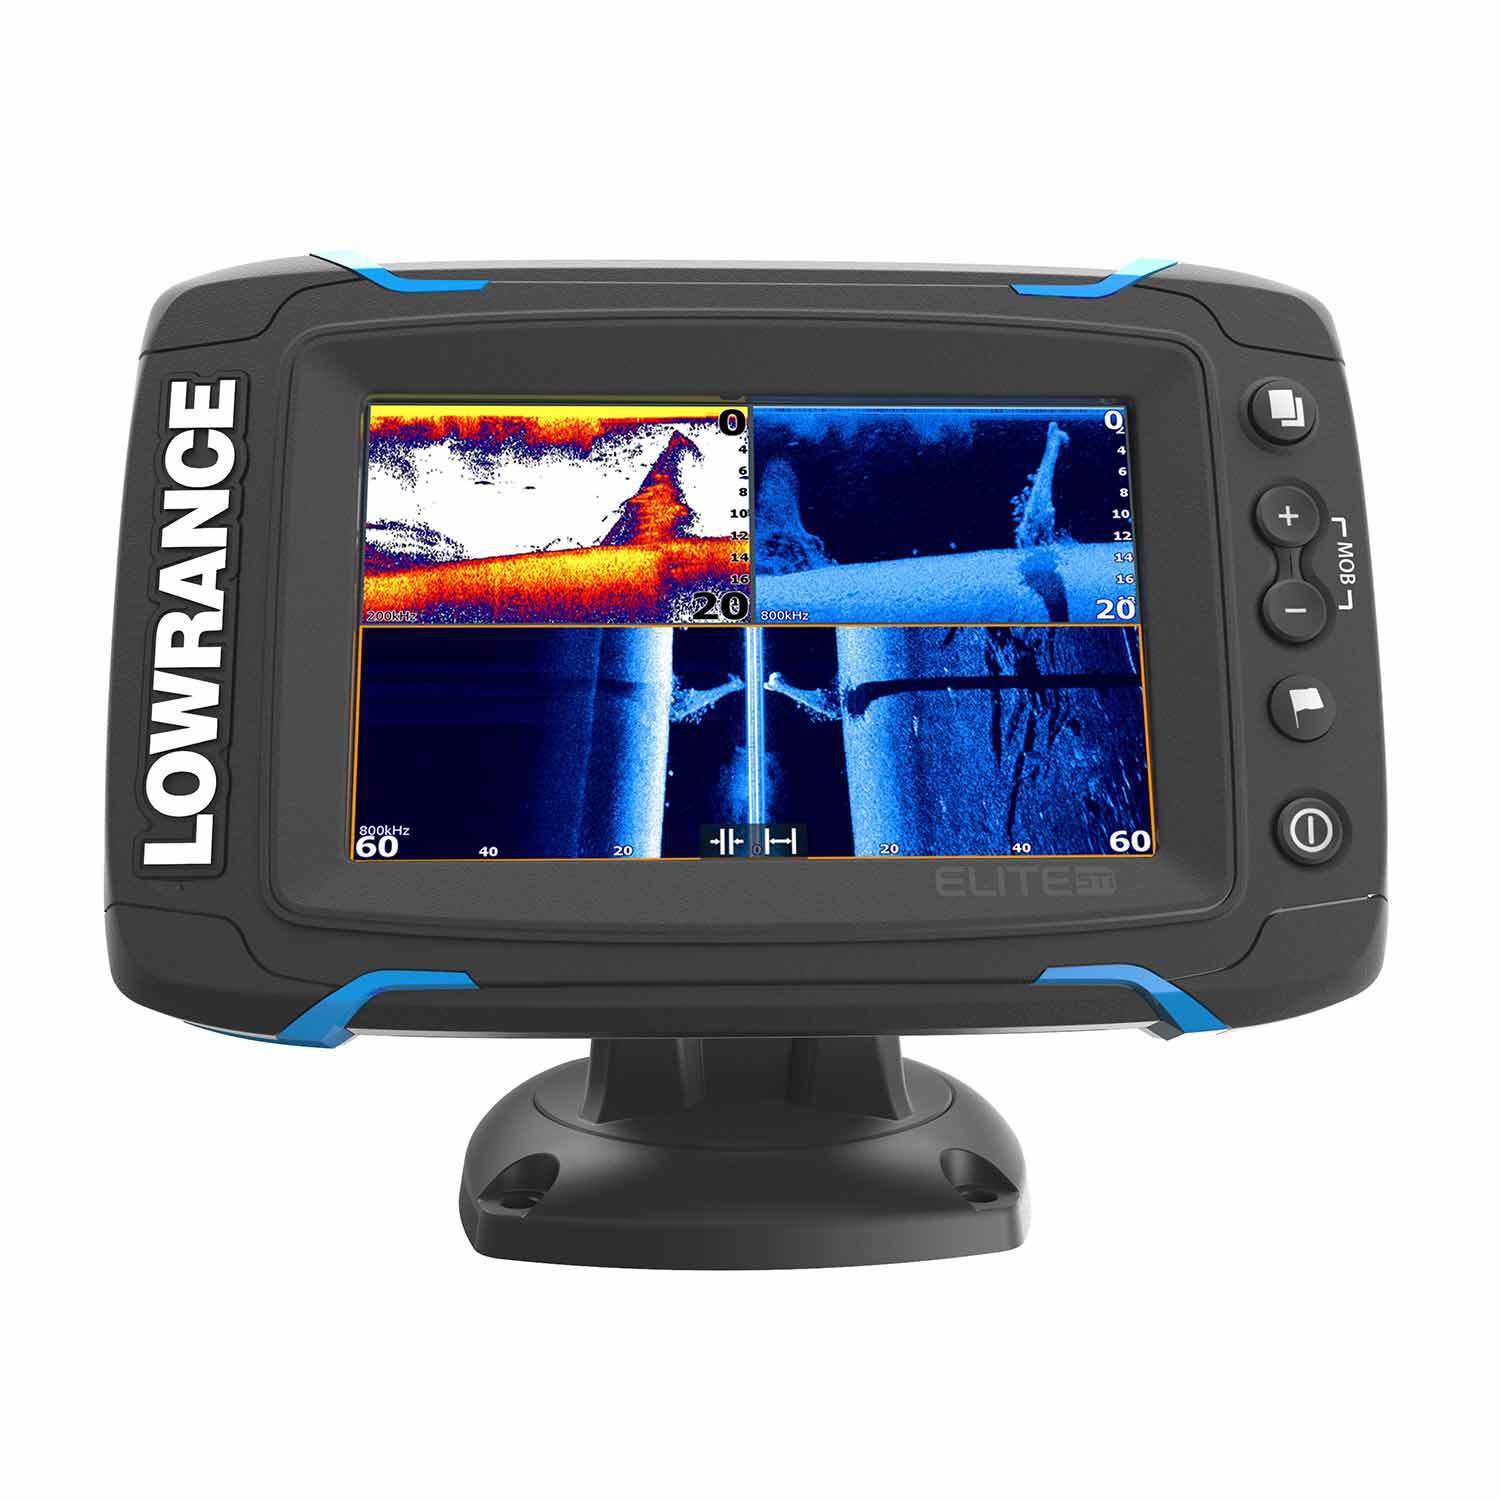 Lowrance Elite-5 Ti Touch Combo with CHIRP Sonar & HDI Transducer 000-12421-001 